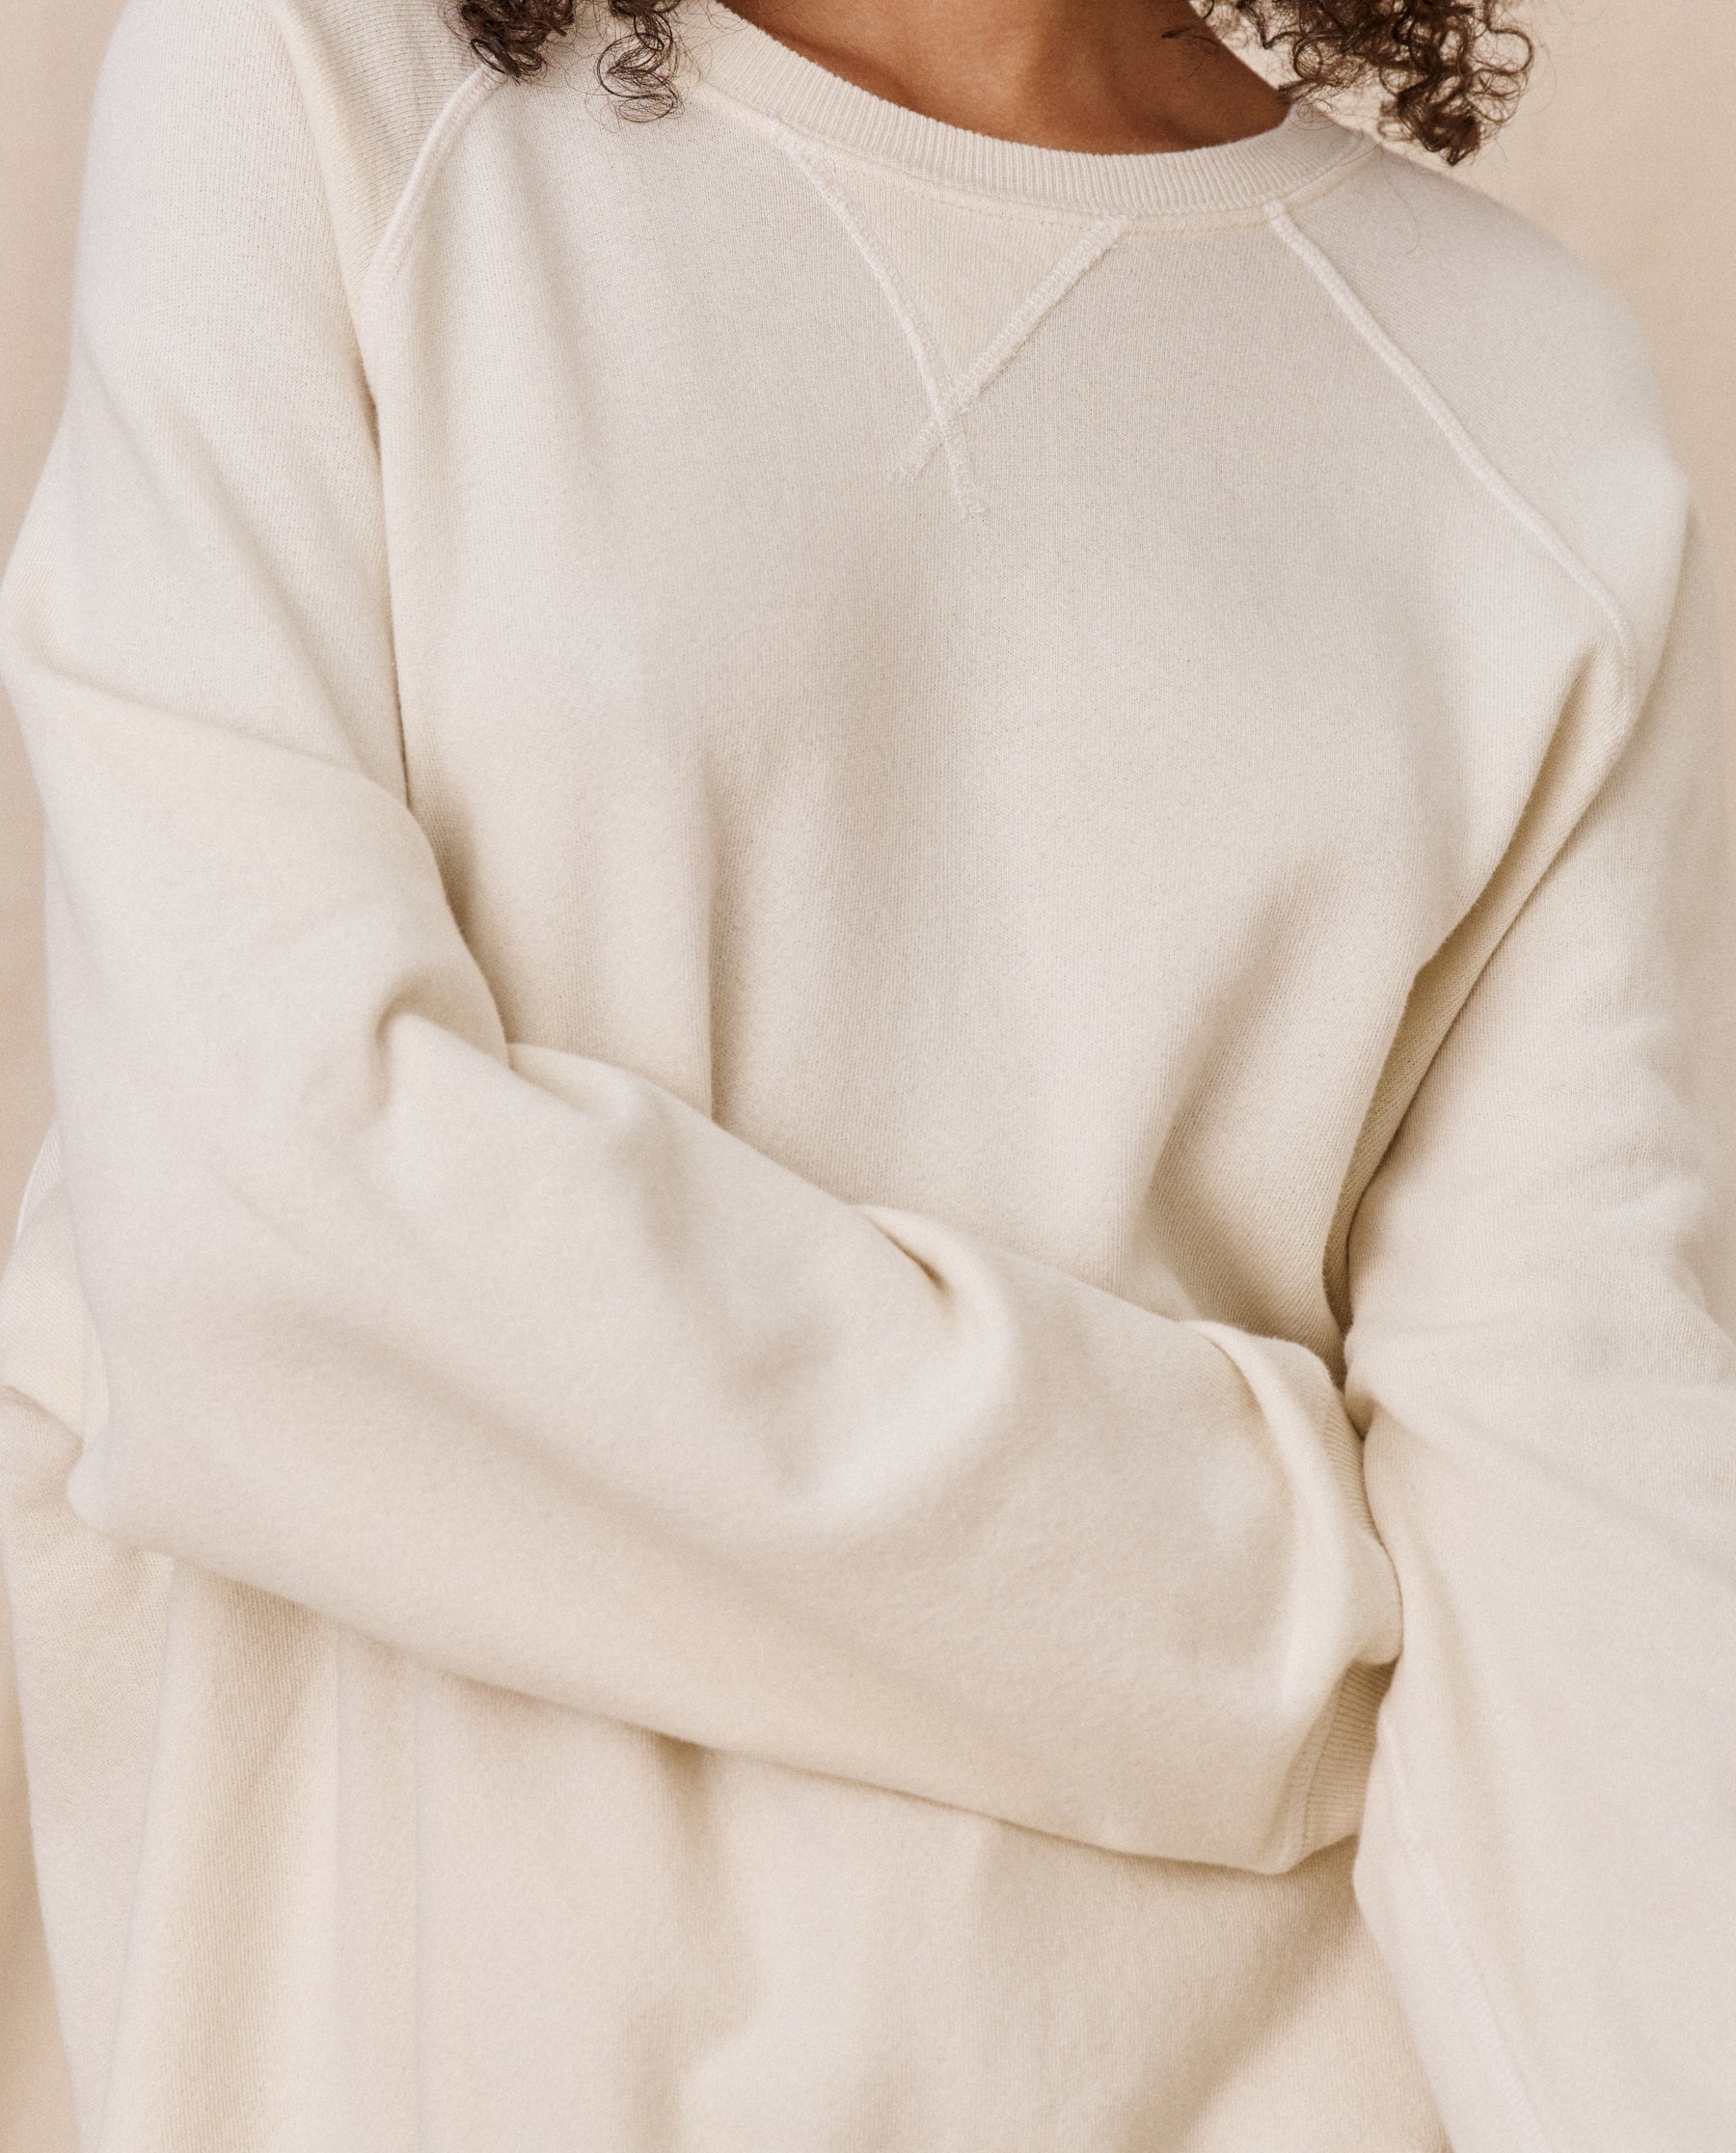 The Slouch Sweatshirt. Solid -- WASHED WHITE SWEATSHIRTS THE GREAT. CORE KNITS